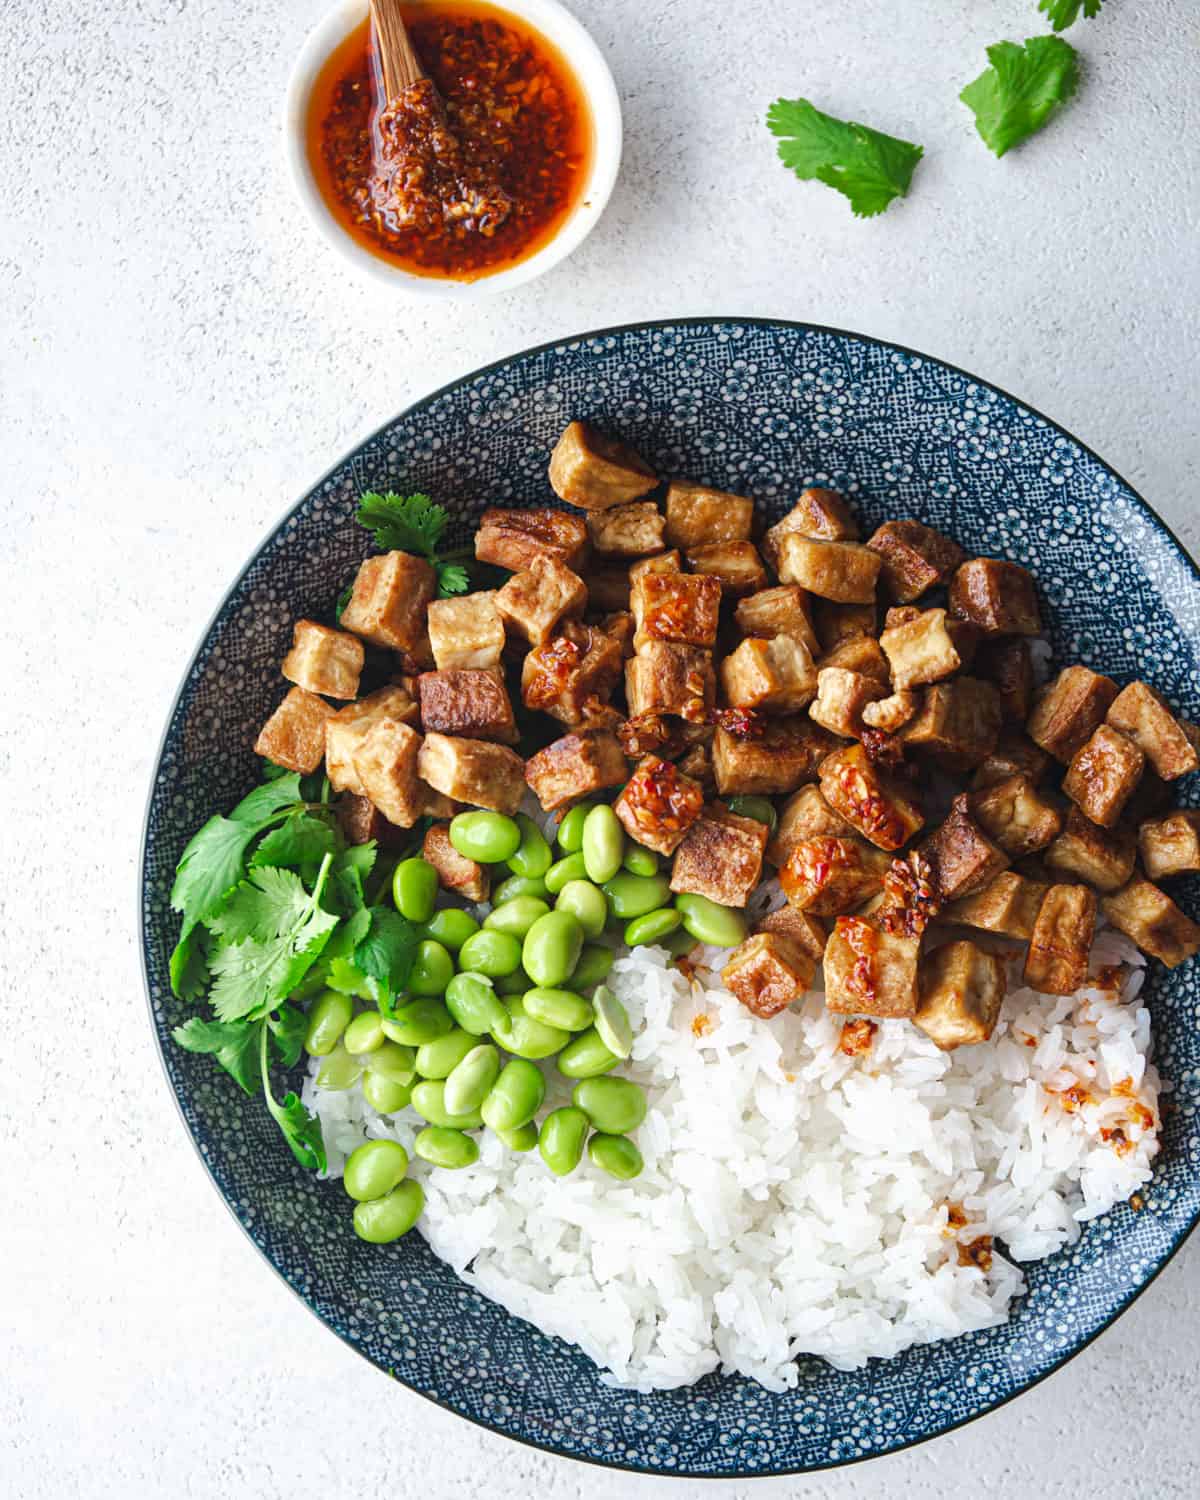 crispy tofu, rice and beans on a blue plate